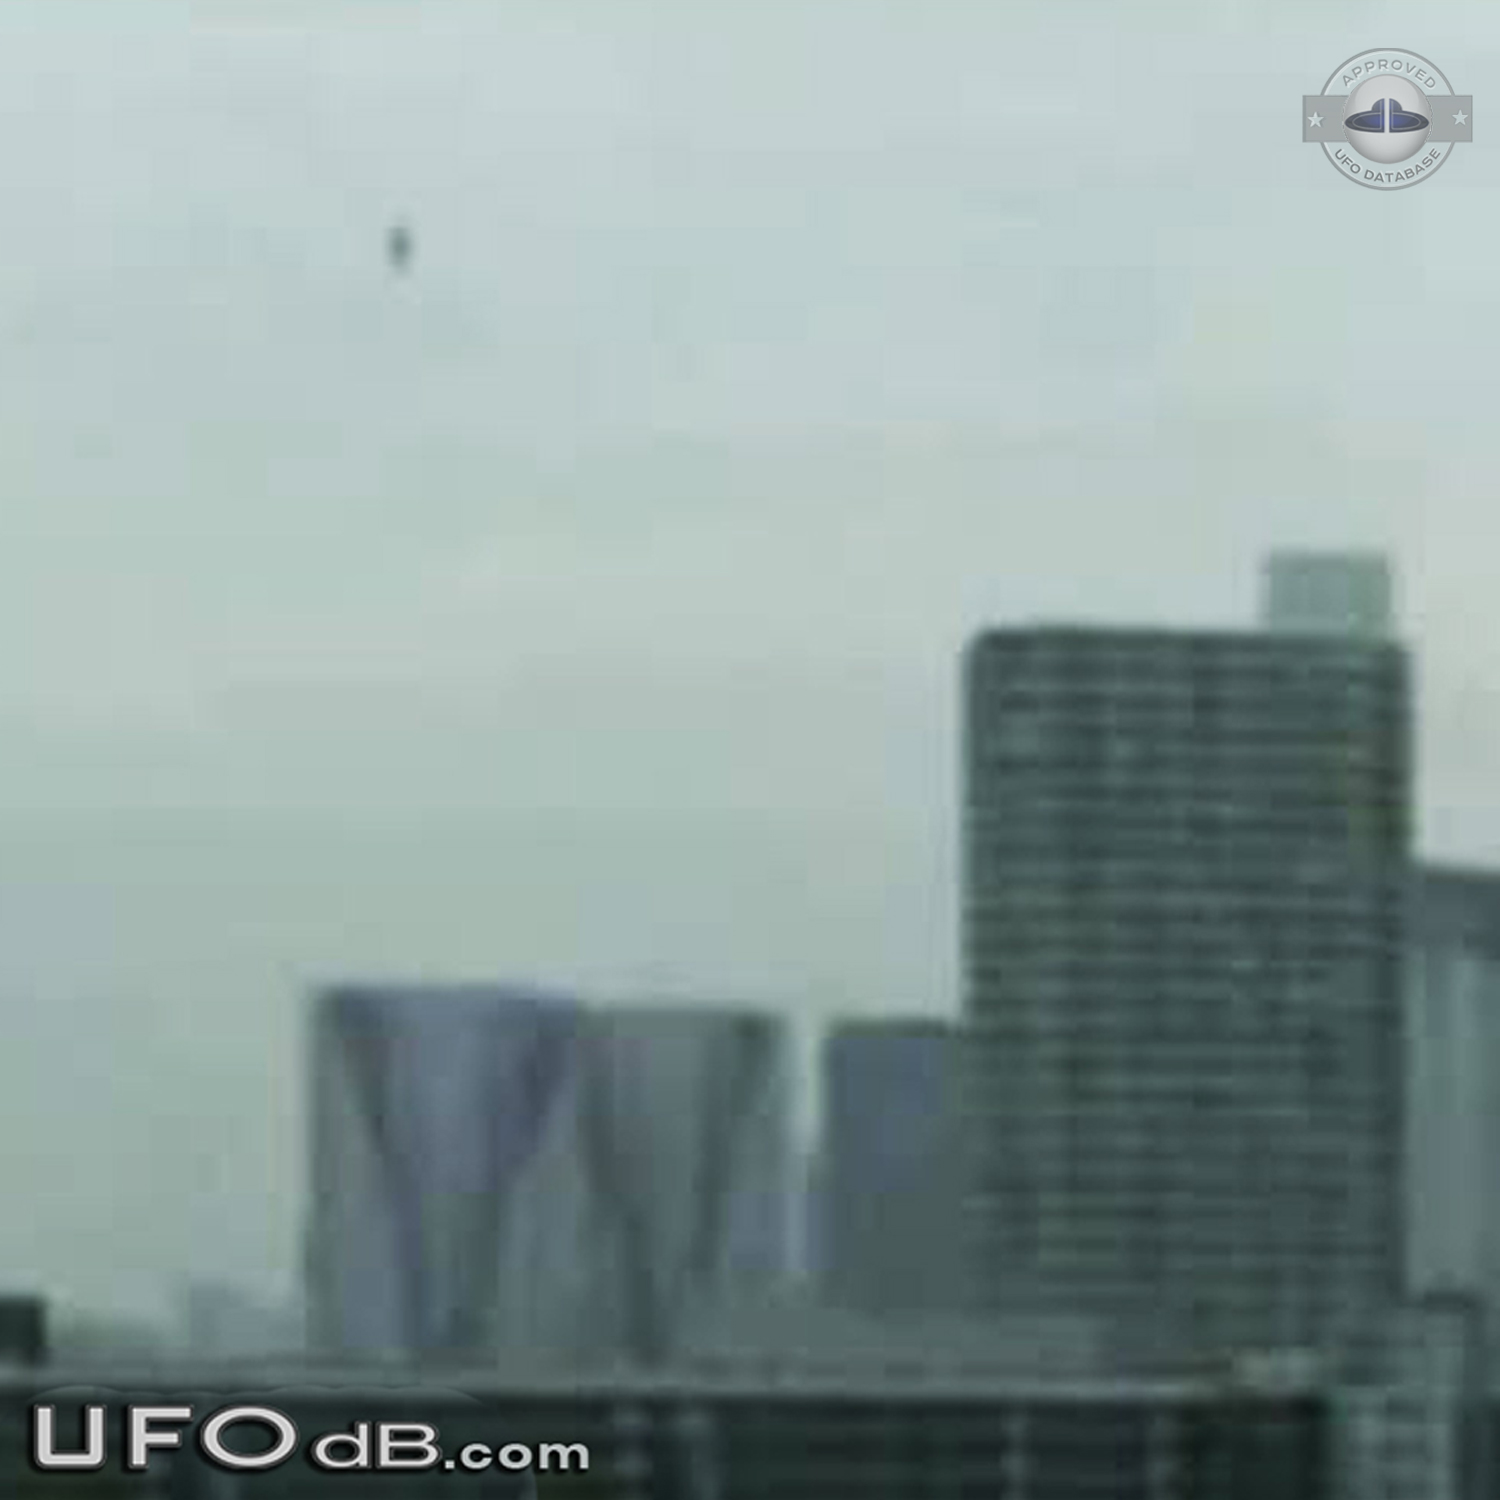 Probe ufo sighting caught on picture in Tokyo, Japan - January 2012 UFO Picture #410-3